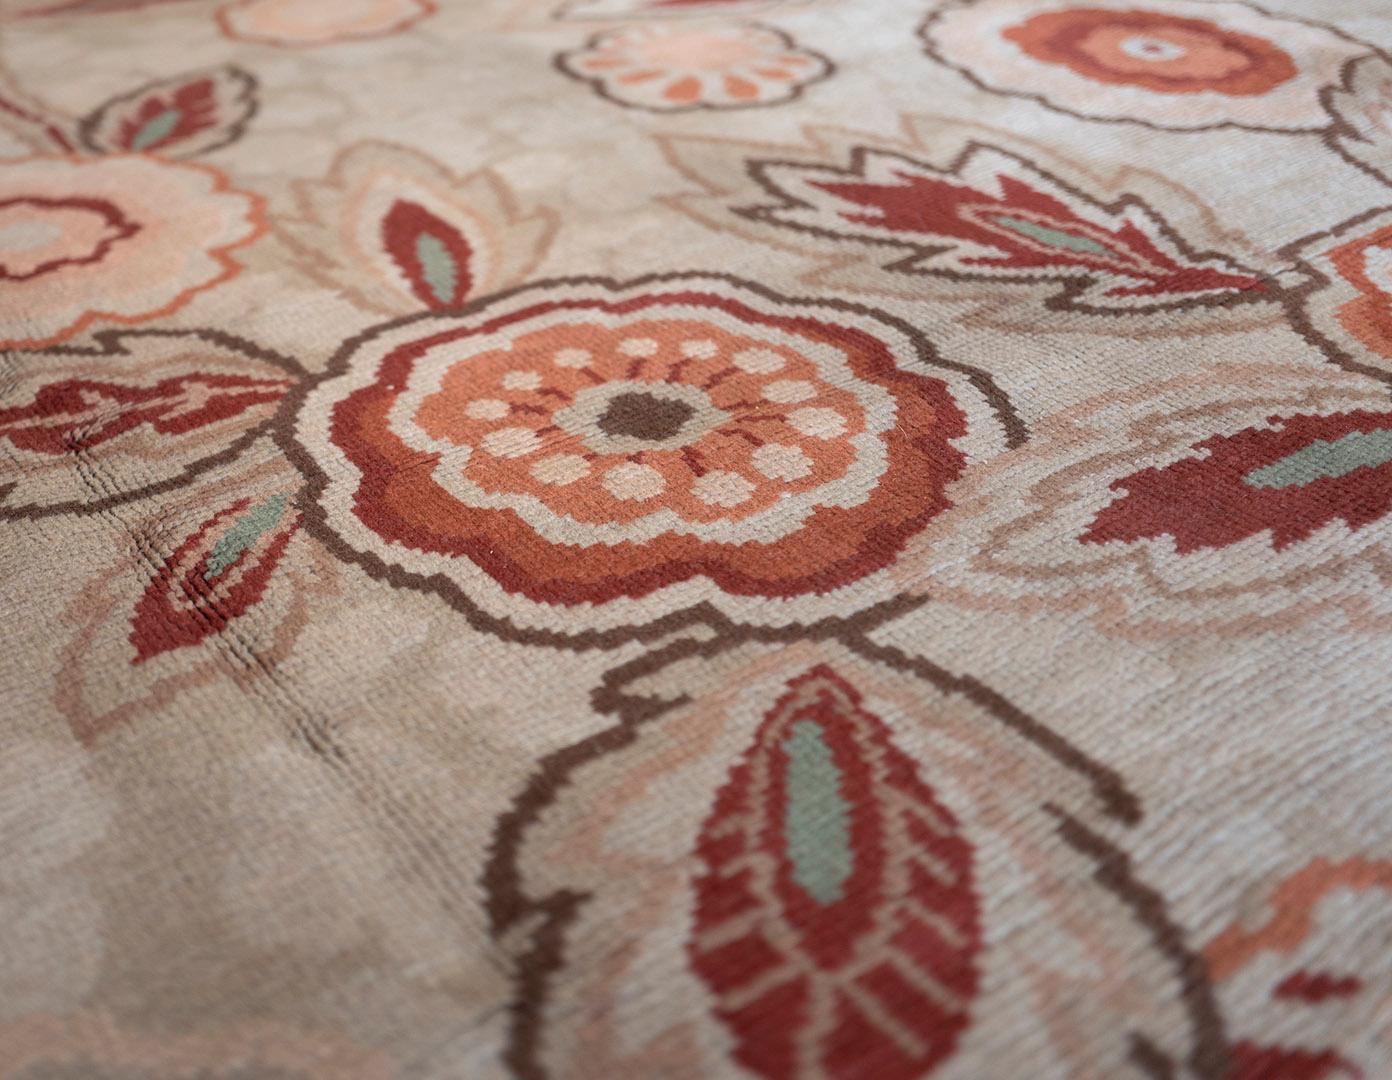 This traditional handwoven European rug has an overall taupe field and a whimsical stylized floral bouquet rendered in shades of pink and rust, in a brown border.